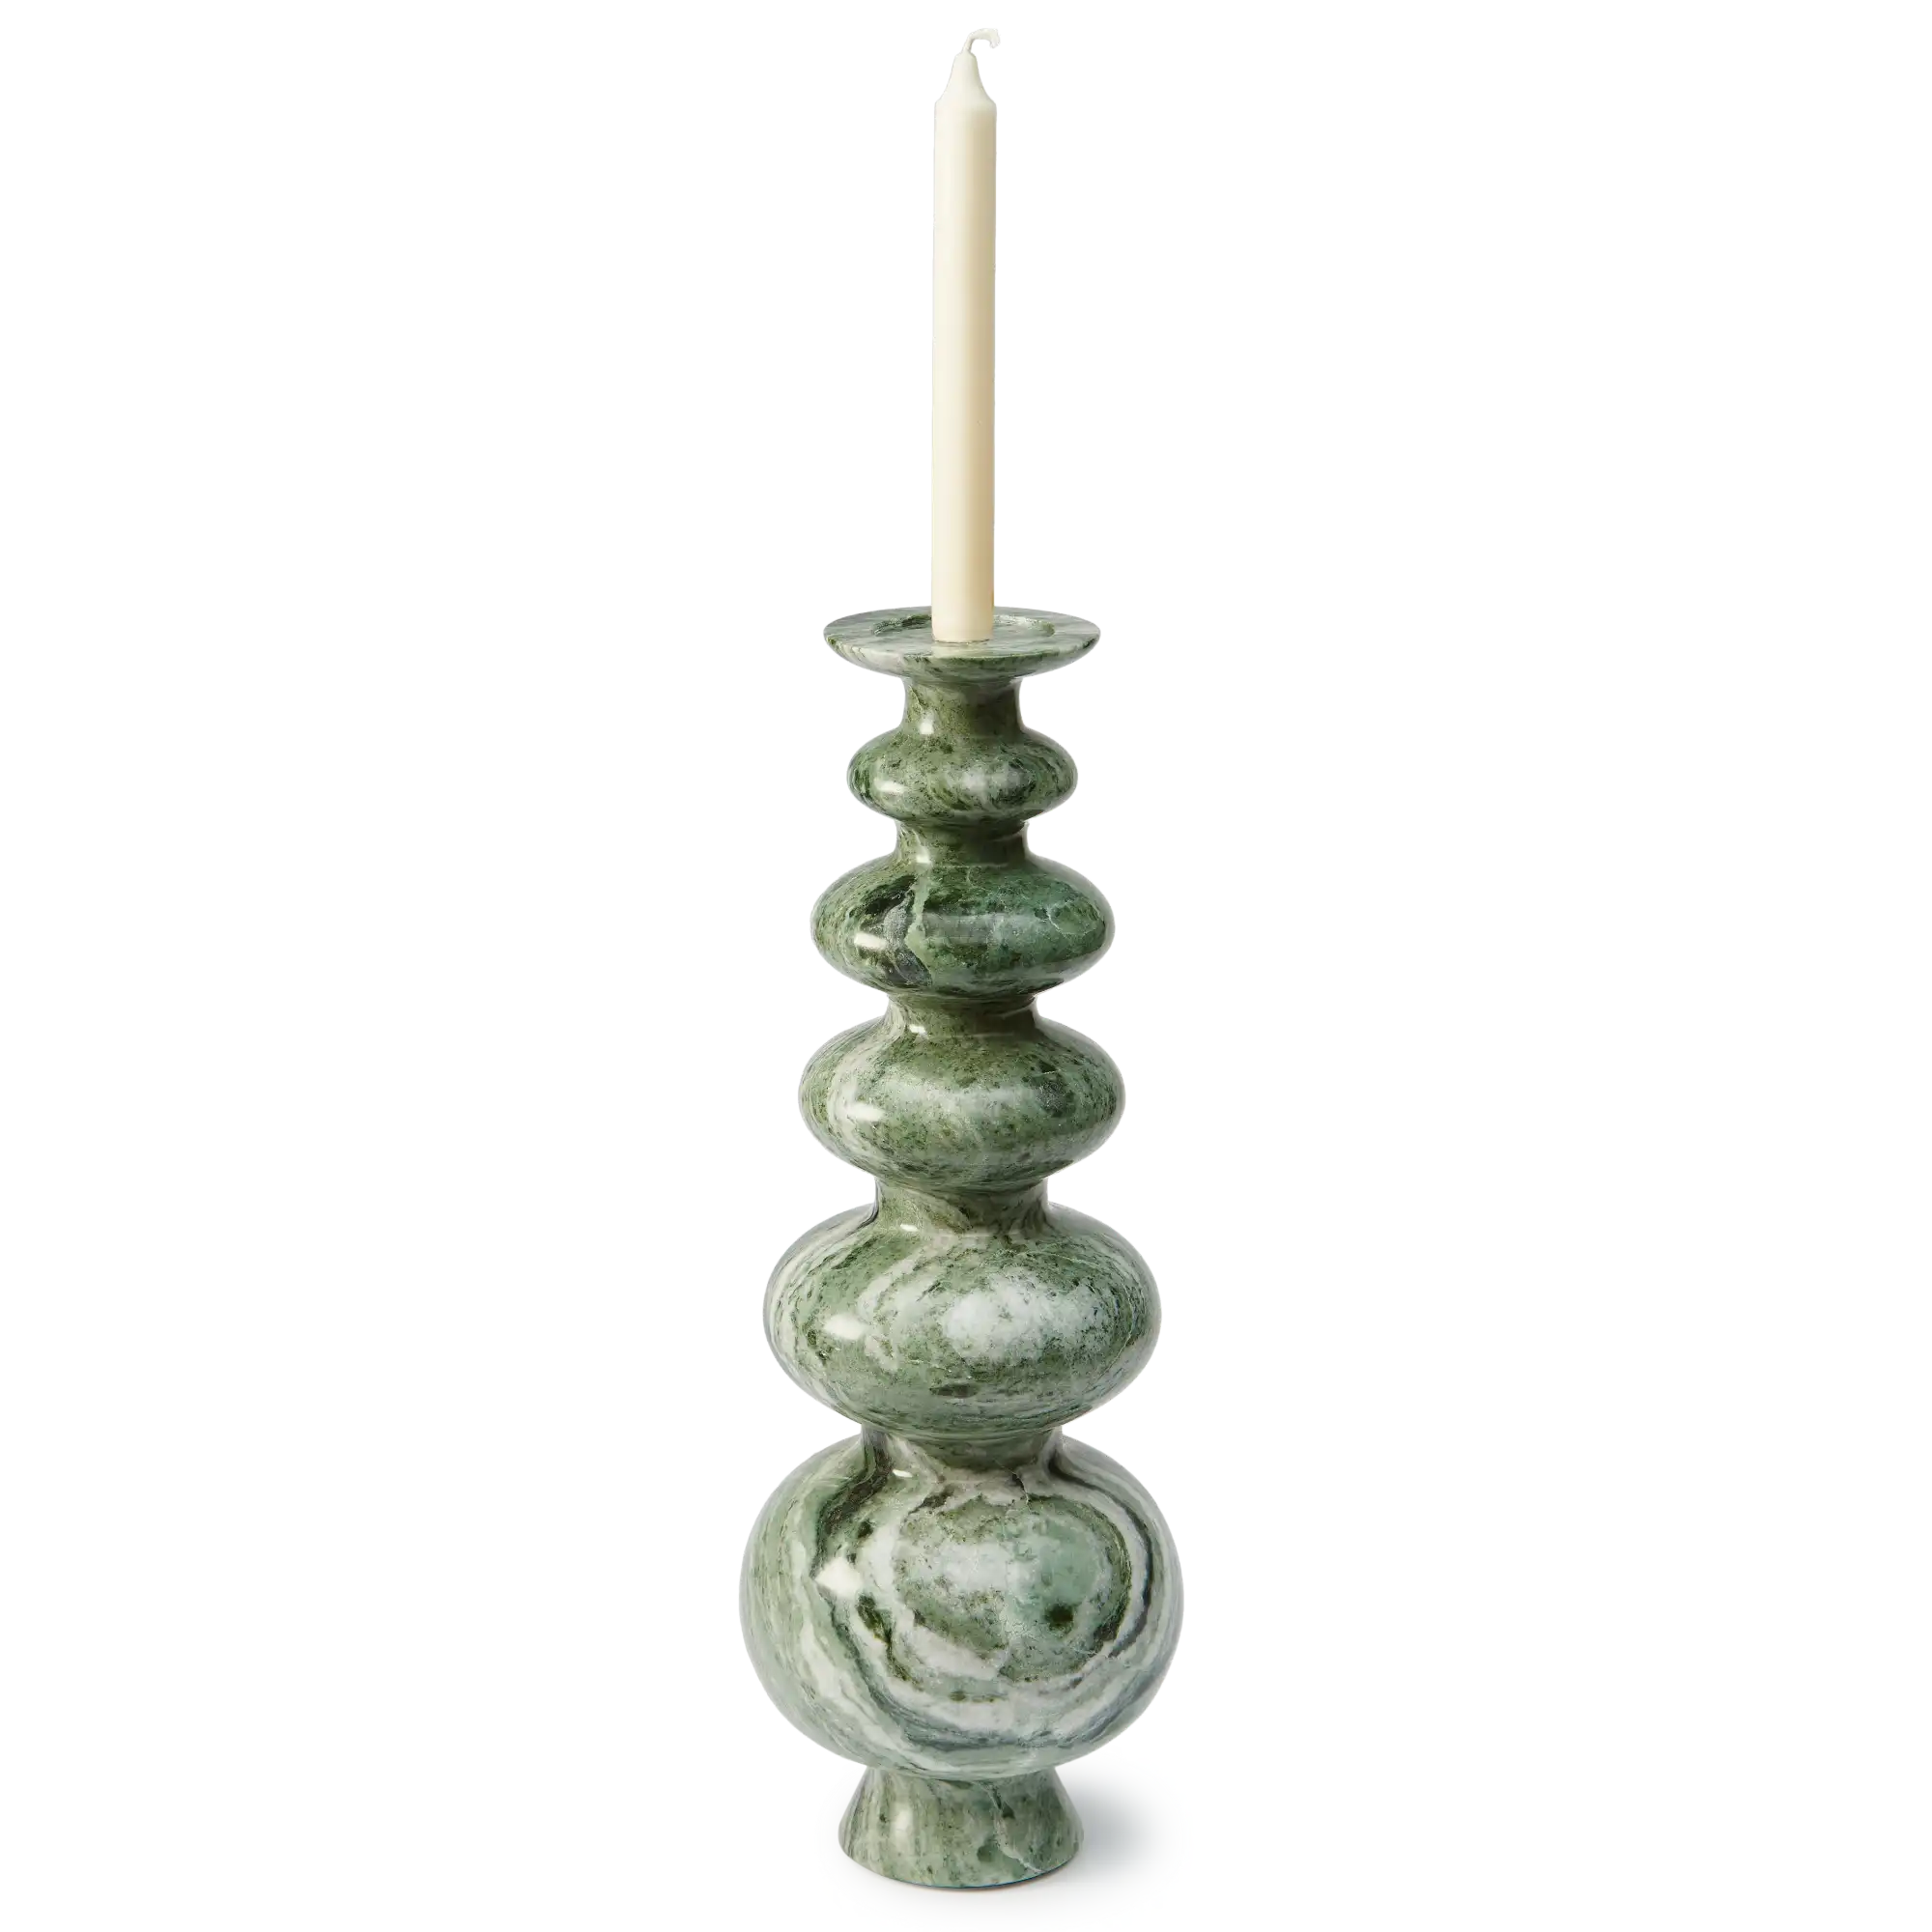 Herritage Sphere Candle Holder - THAT COOL LIVING